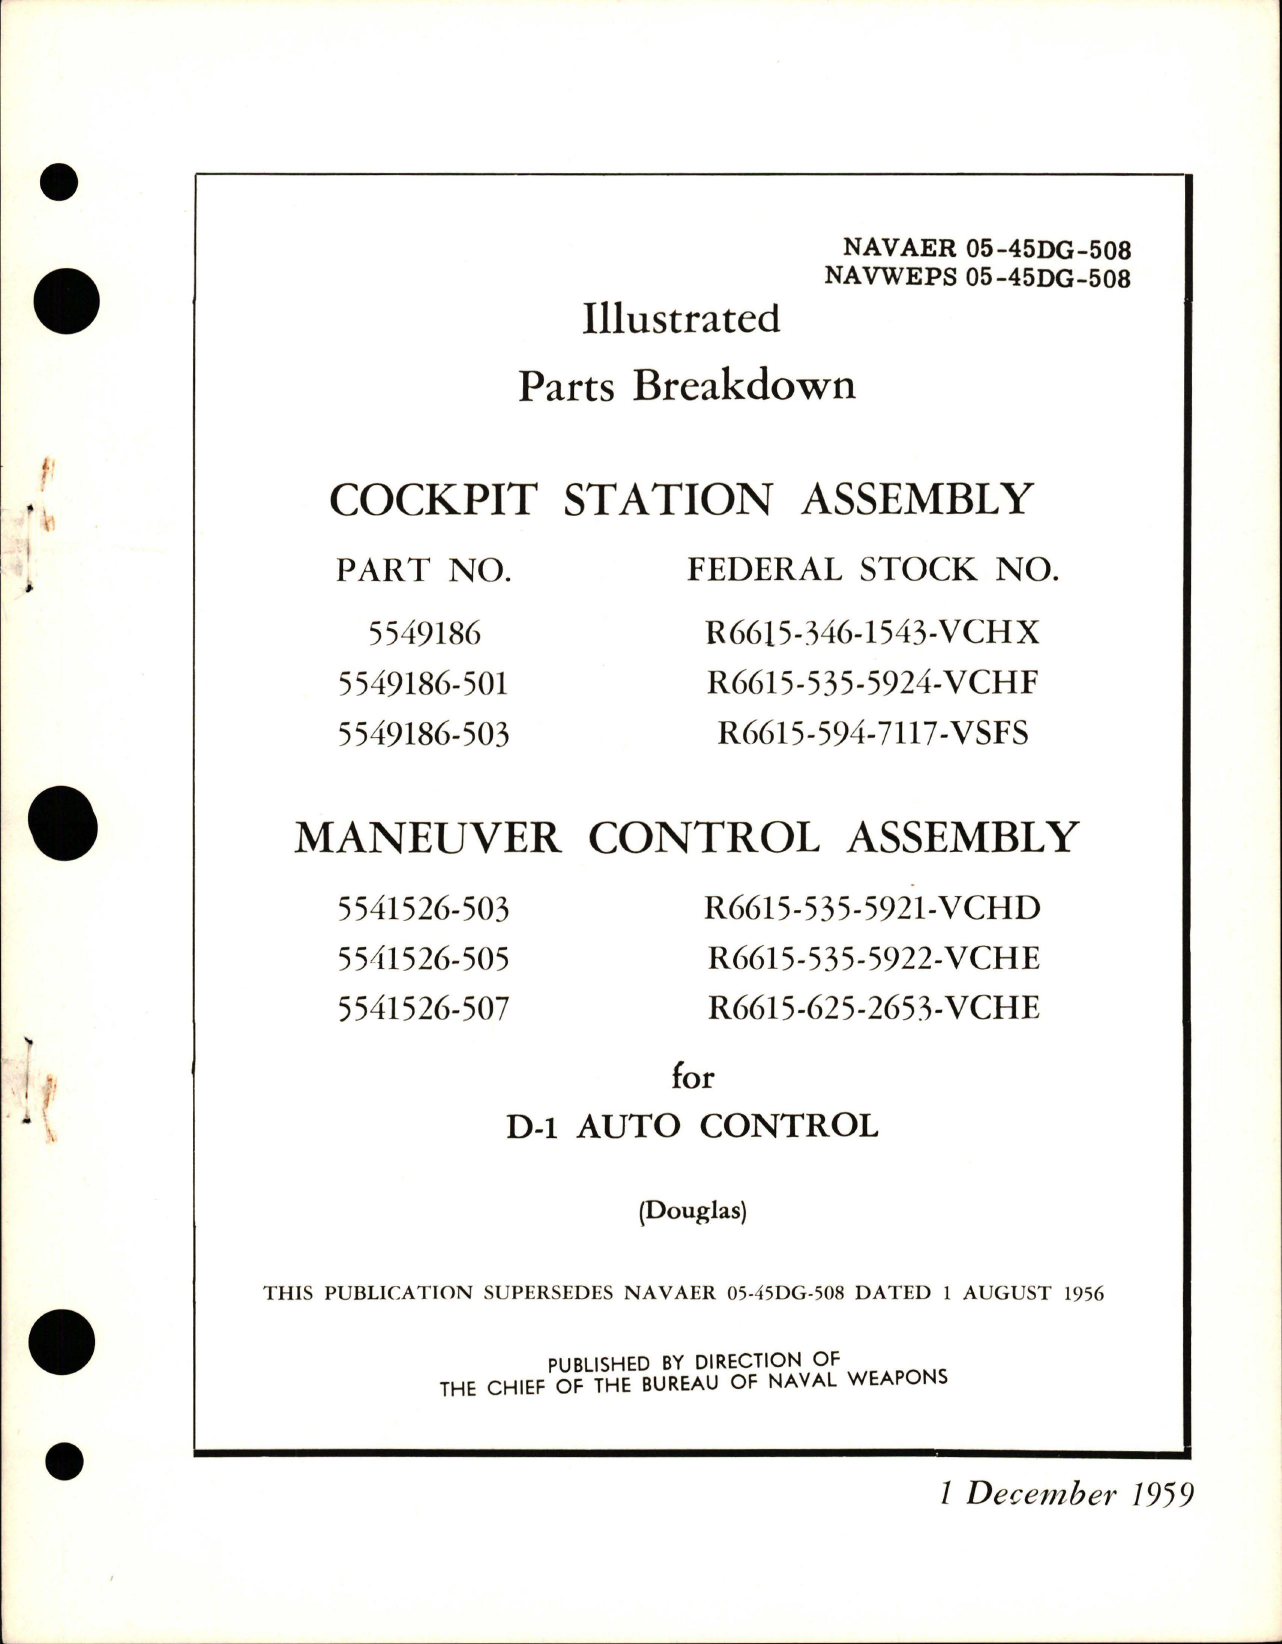 Sample page 1 from AirCorps Library document: Illustrated Parts Breakdown for Cockpit Station Assembly, Maneuver Control Assembly for D-1 Auto Control